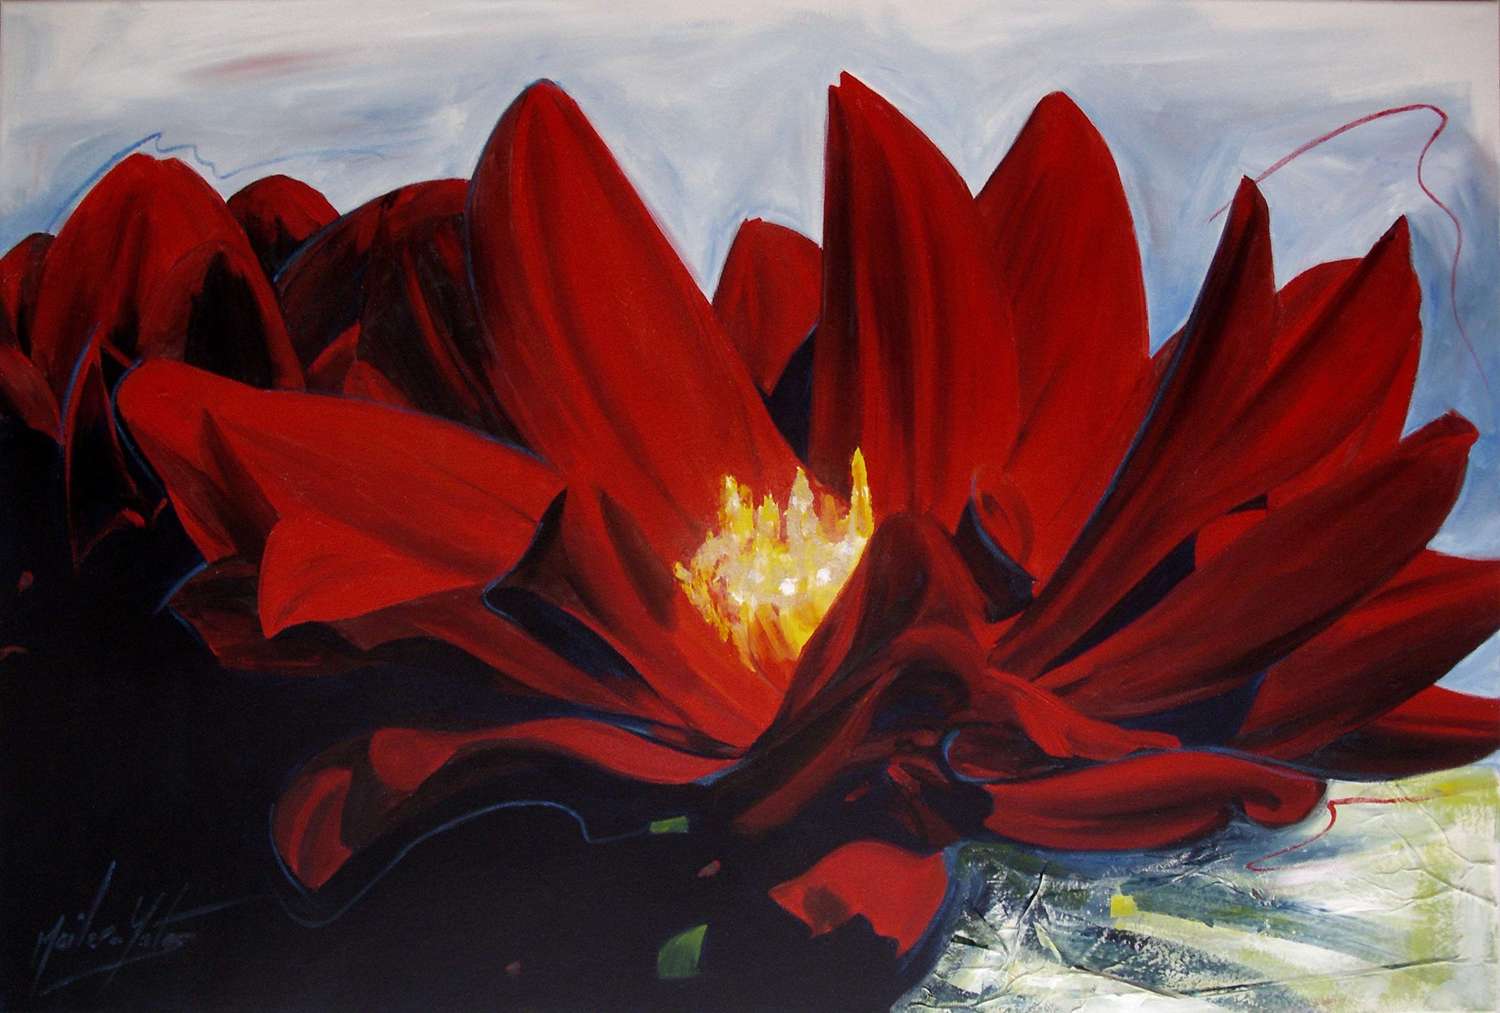 'Waterlily' 2007